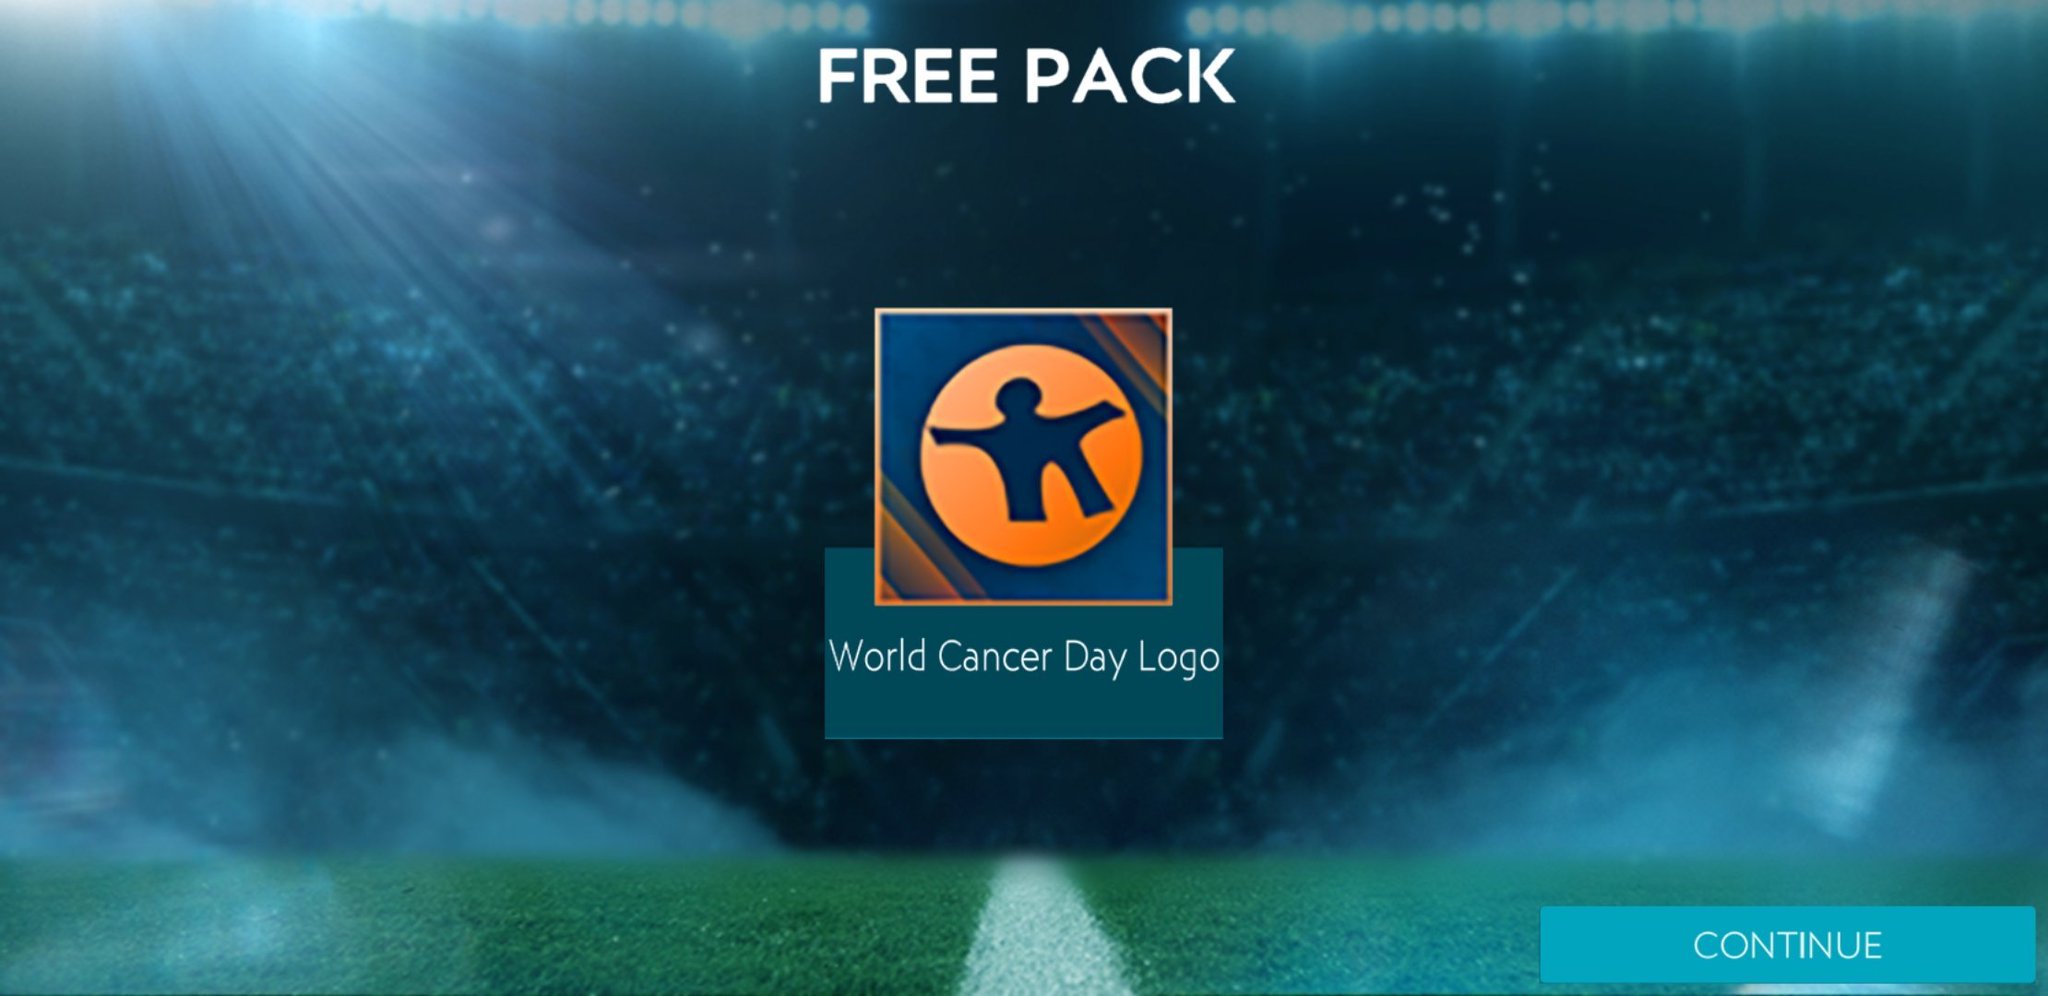 Fifa Mobile News In Amt S Honor Ea Just Provided Everyone With The World Cancer Day Logo In Fifa Mobile Change Your Logo To This Fifamobile Fifamobile Fut T Co U6s9ogmzlw